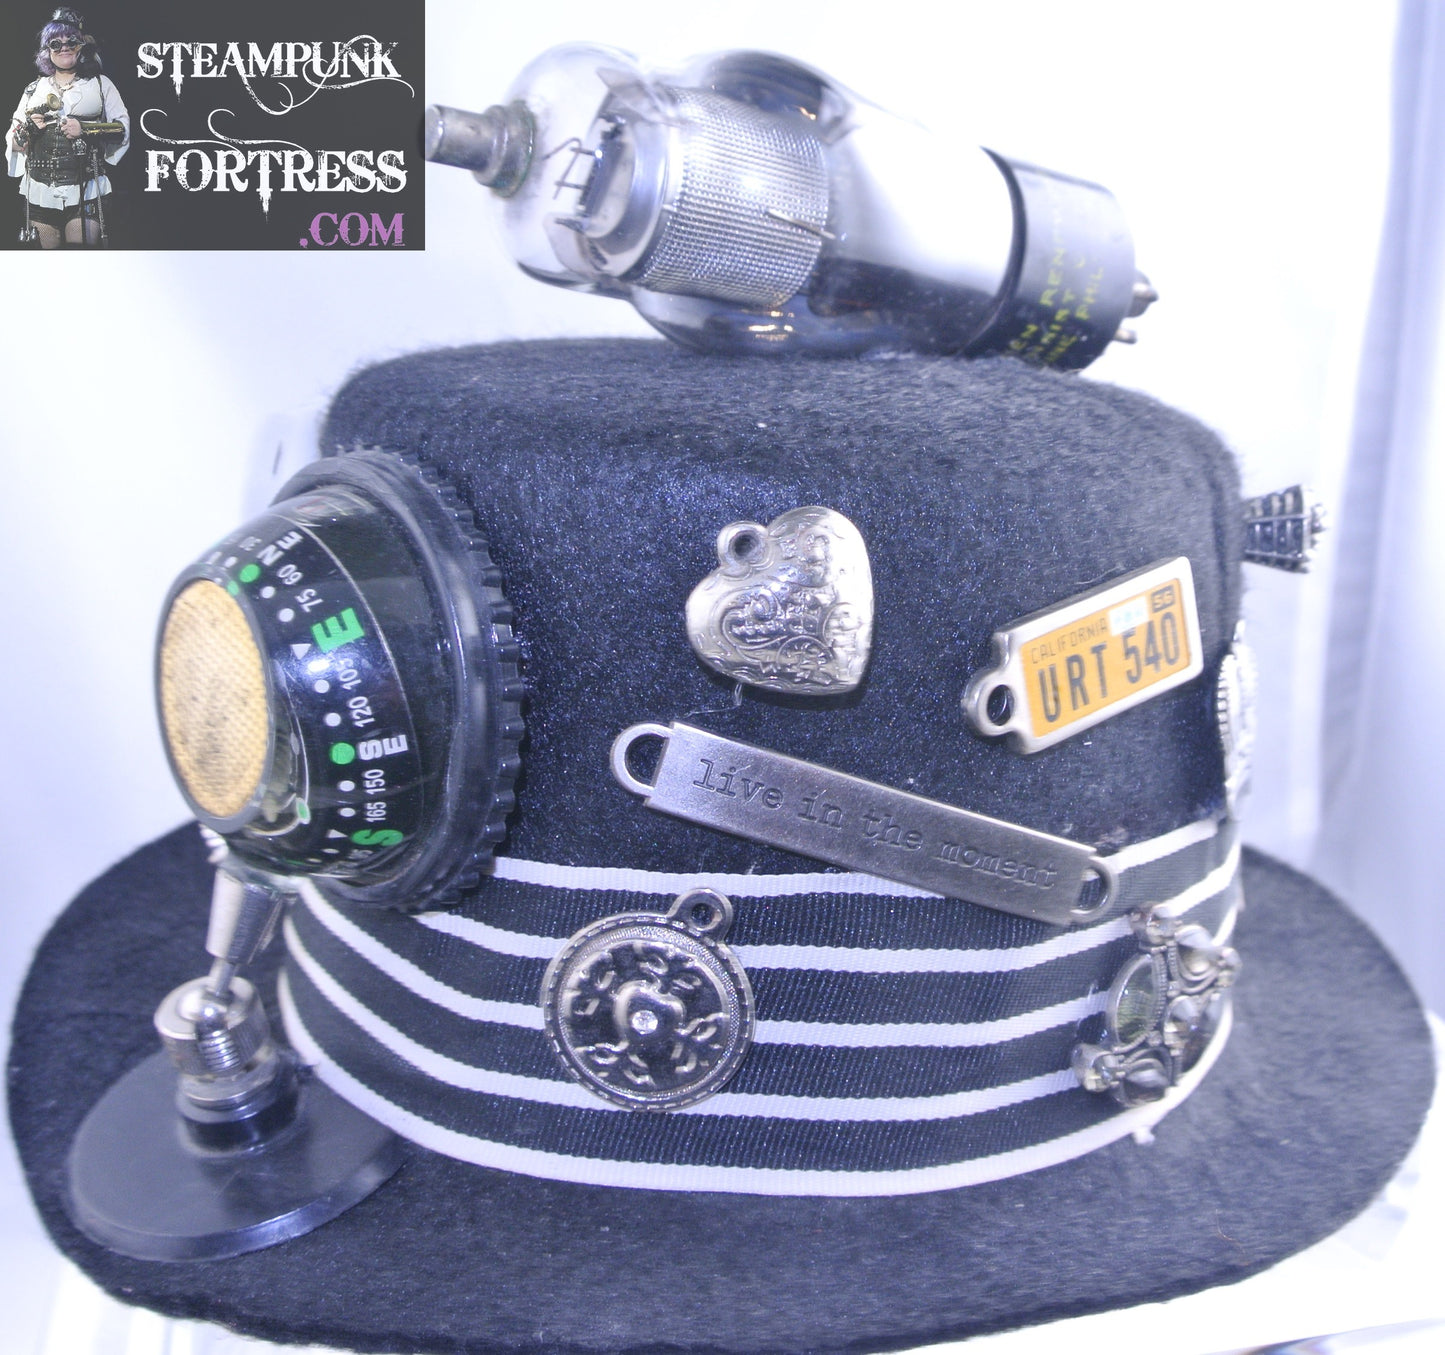 BLACK COMPASS LIVE IN MOMENT LICENSE PLATE CROWN WING KEYS SYRINGE PEN SIGN SKULL THIMBLE HEART BASKET OF NEEDLES SCORPION MISCELLANEOUS CHARMS ROCKET TOP BLACK WHITE STRIPED RIBBON LARGE TOP HAT STARR WILDE STEAMPUNK FORTRESS